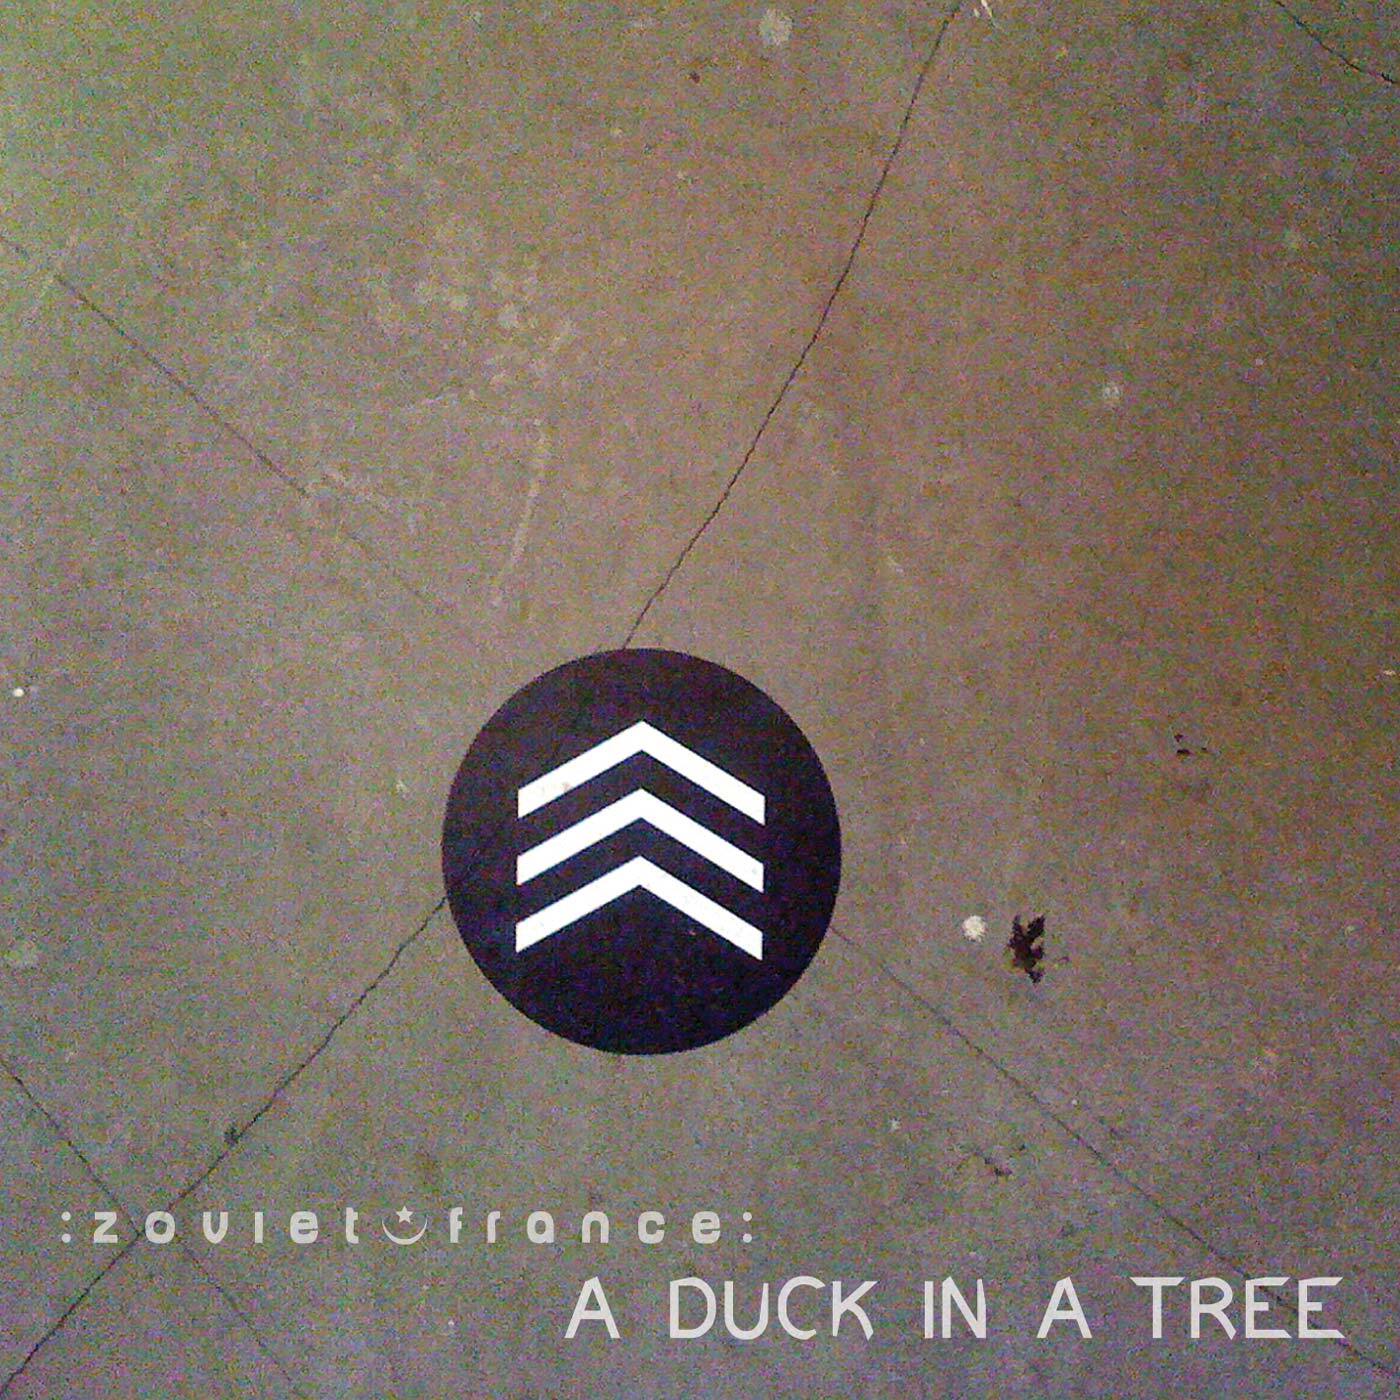 A-Duck-in-a-Tree-2014-05-17-_-Of-Time-Se